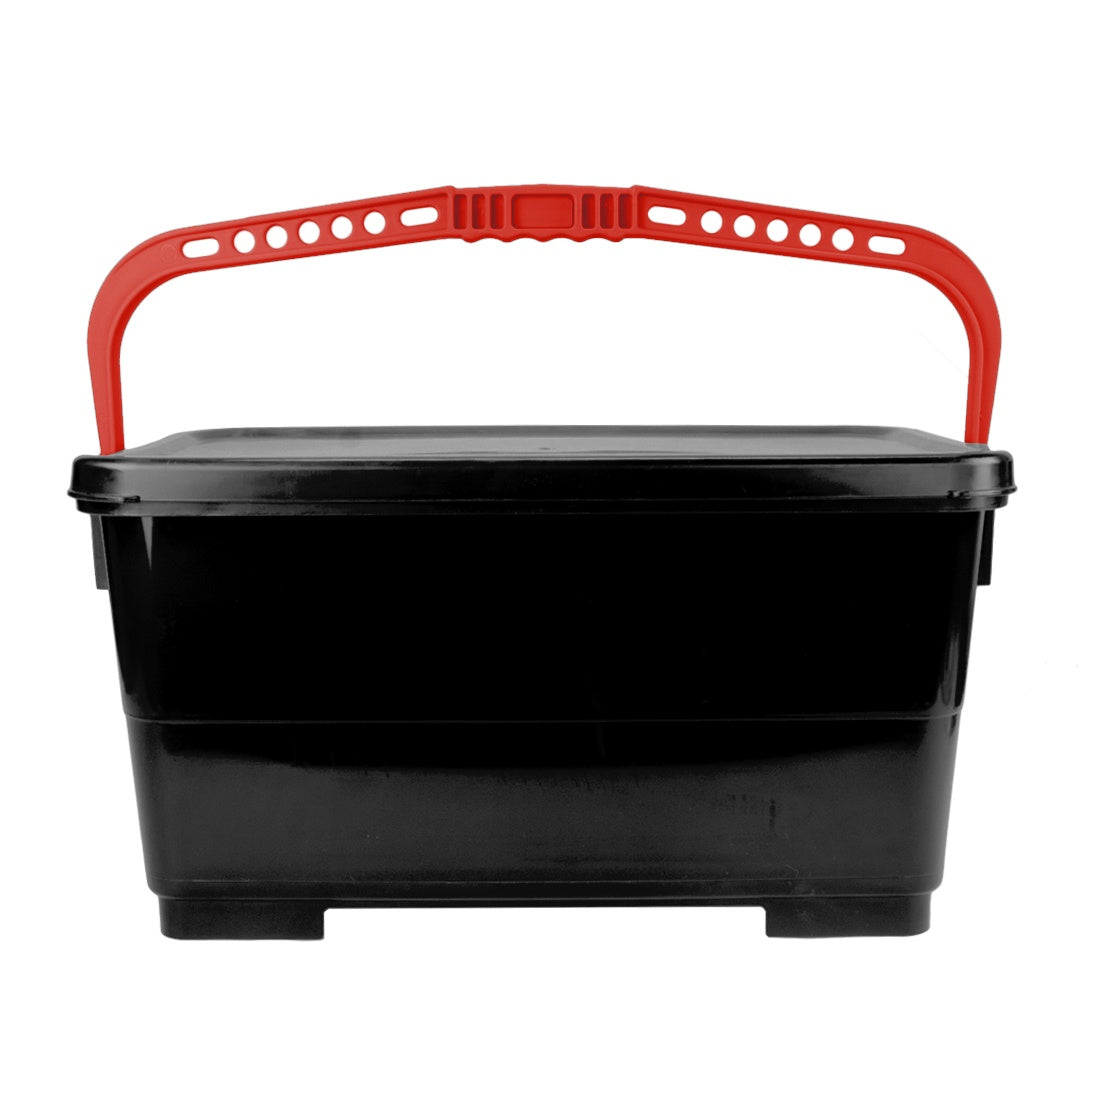 Pulex Bucket Set Black and Red View